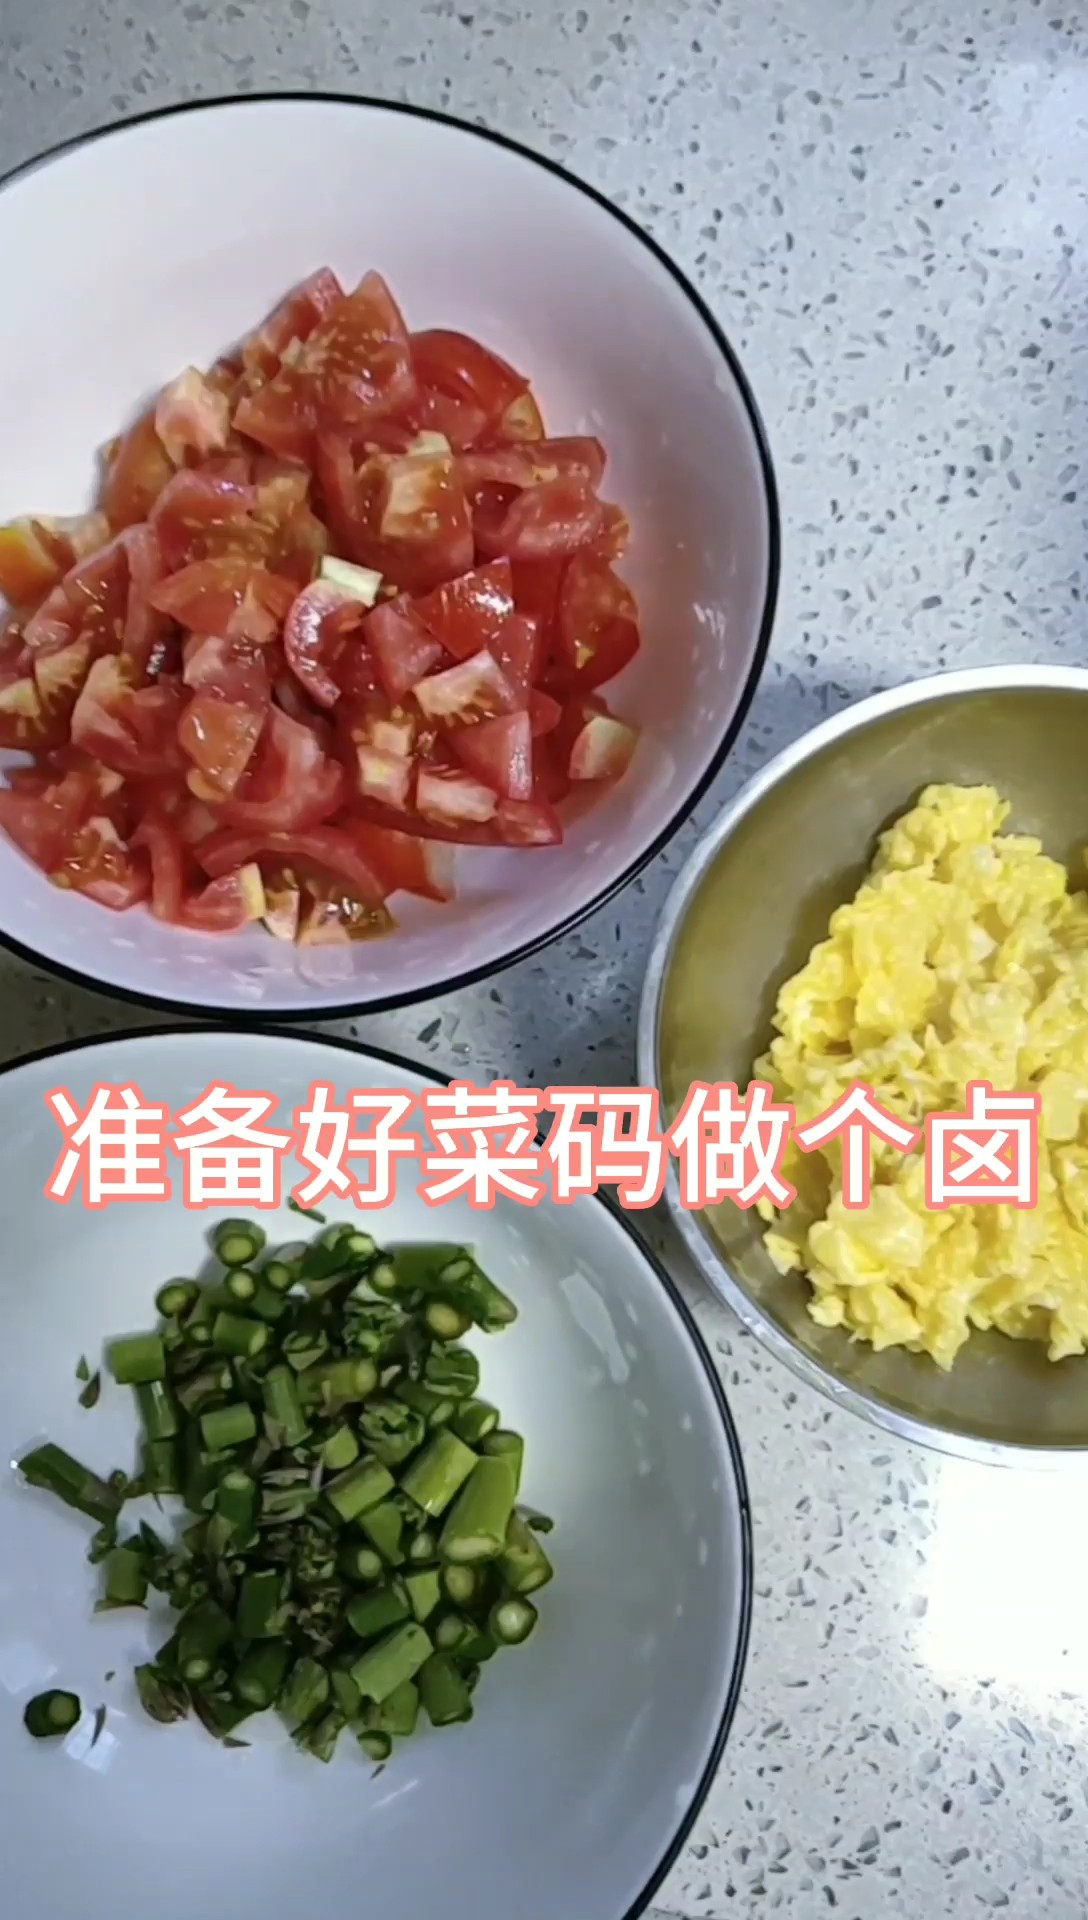 Shanxi Noodles and Castanopsis recipe